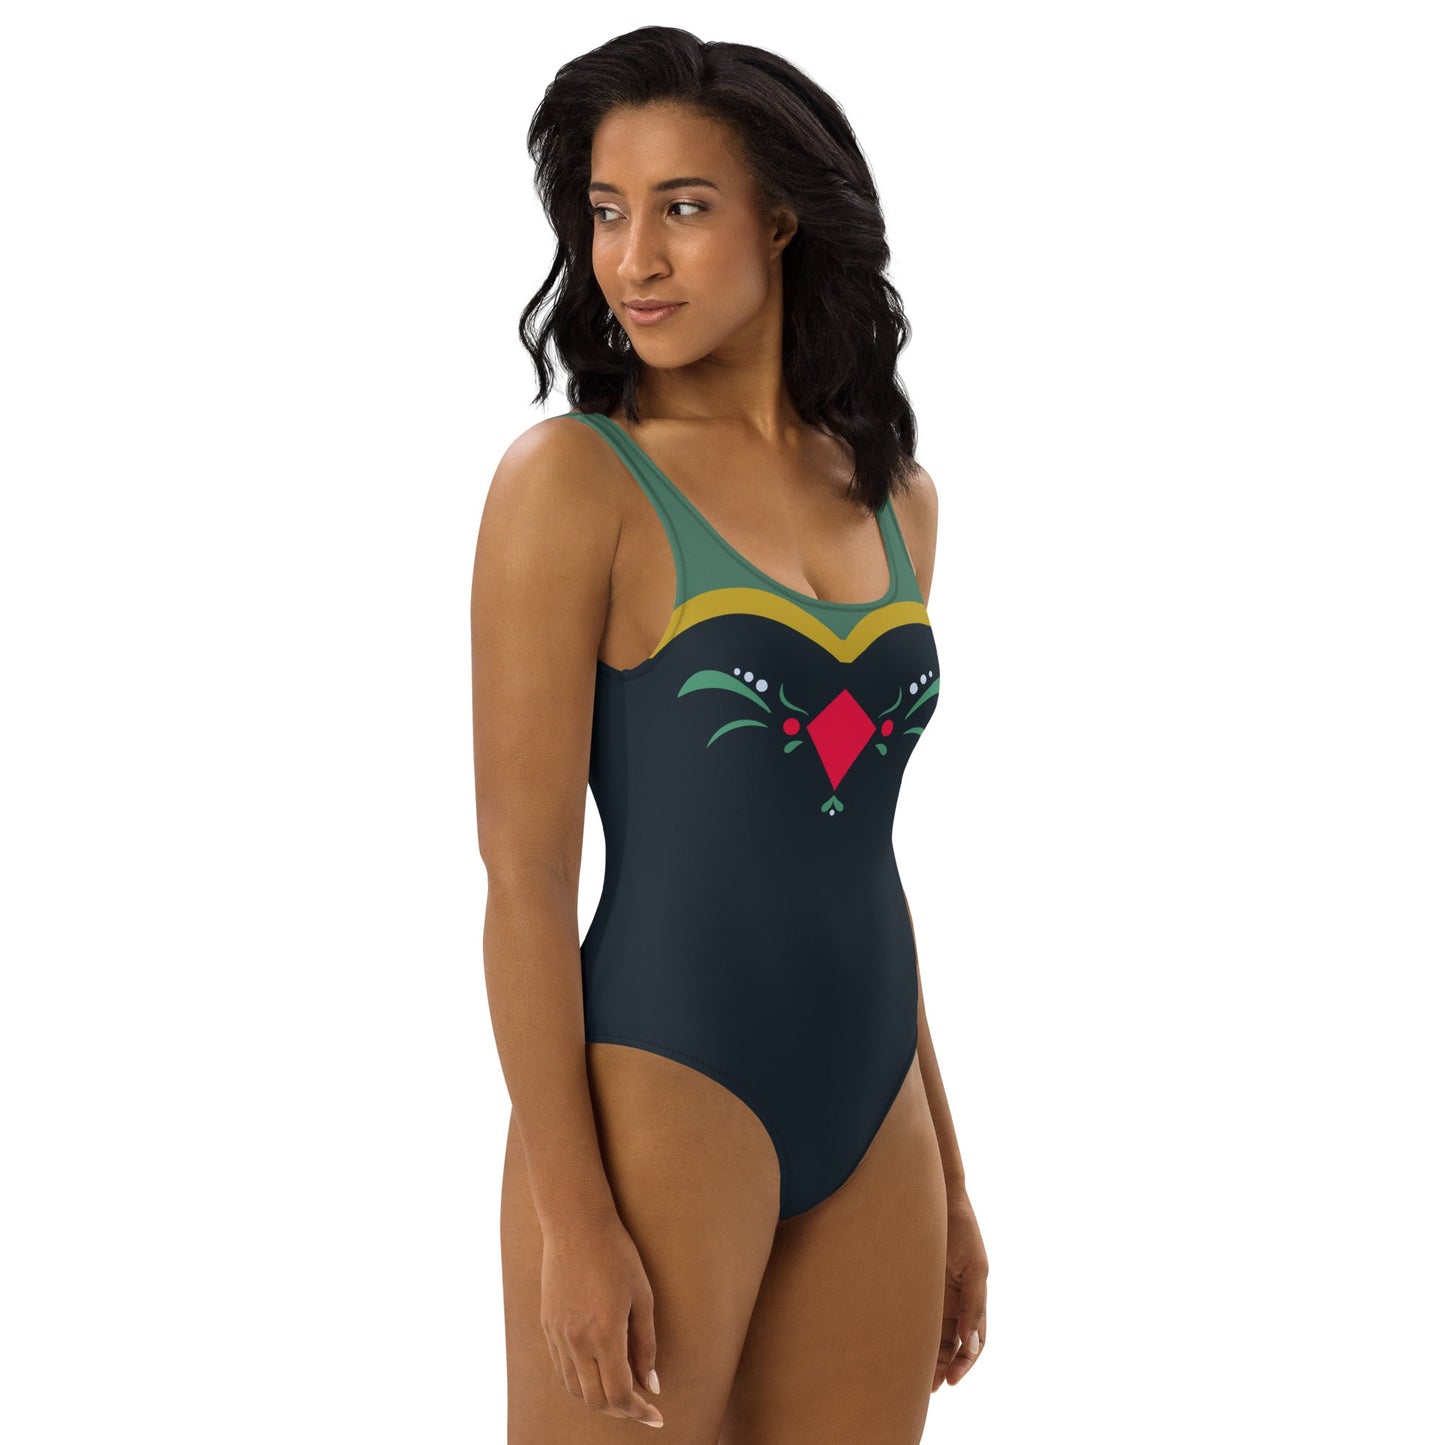 Coronation Day One-Piece Swimsuit adult Anna styleadult frozenSwim SuitWrong Lever Clothing